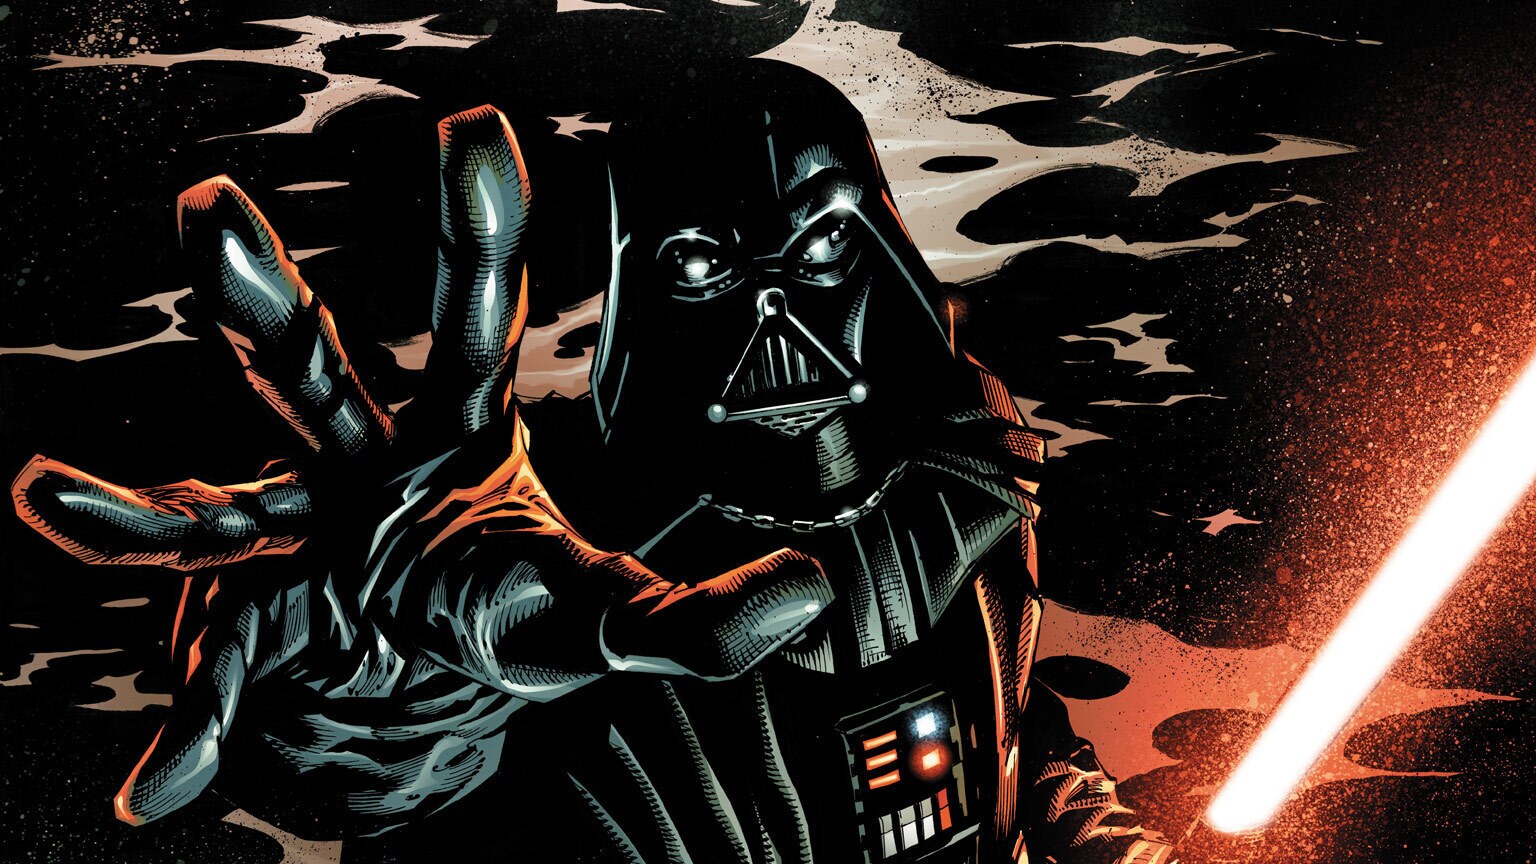 Sabé Returns and More from Marvel’s February 2022 Star Wars Comics - Exclusive